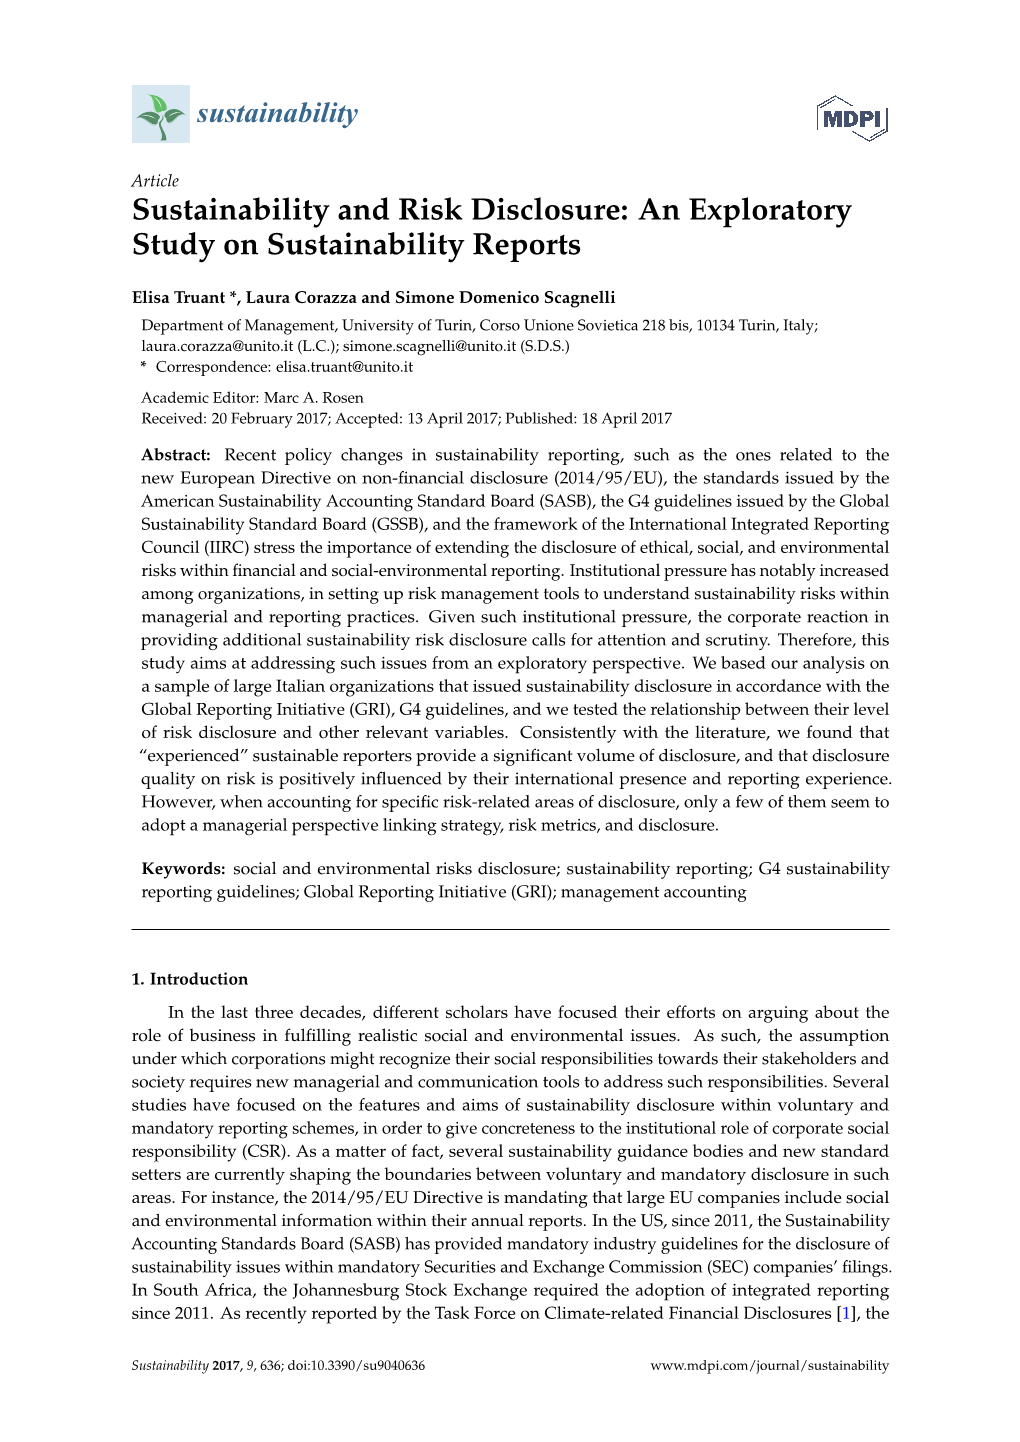 An Exploratory Study on Sustainability Reports